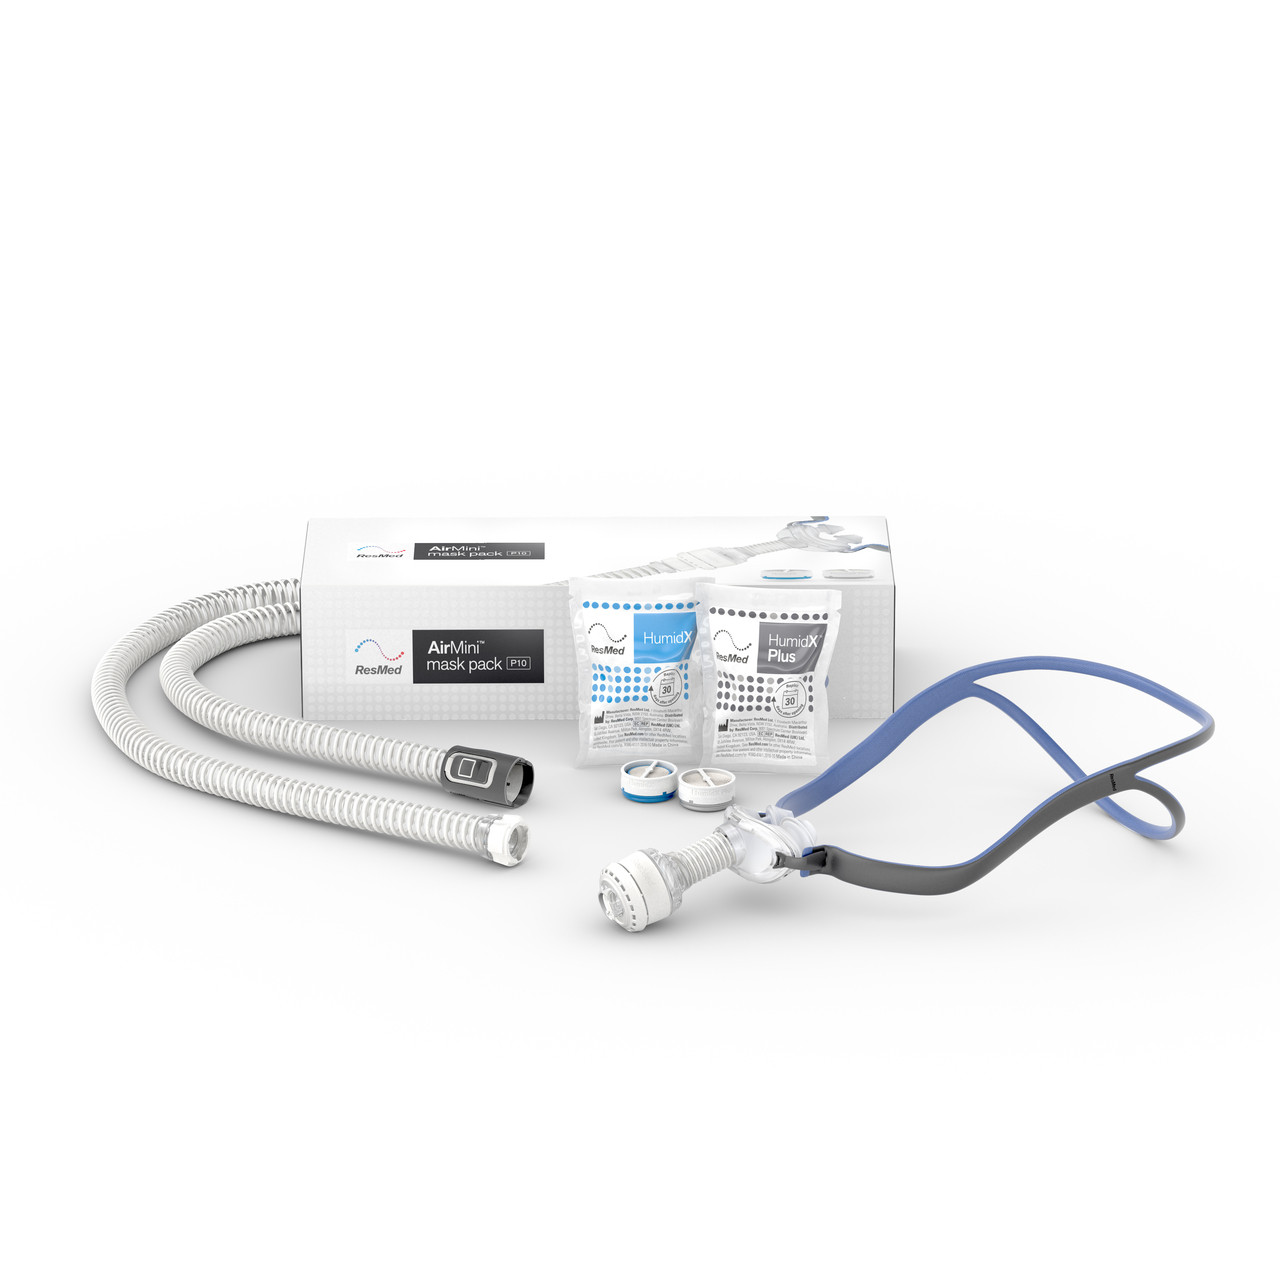 CPAP Machines Products, Supplies and Equipment